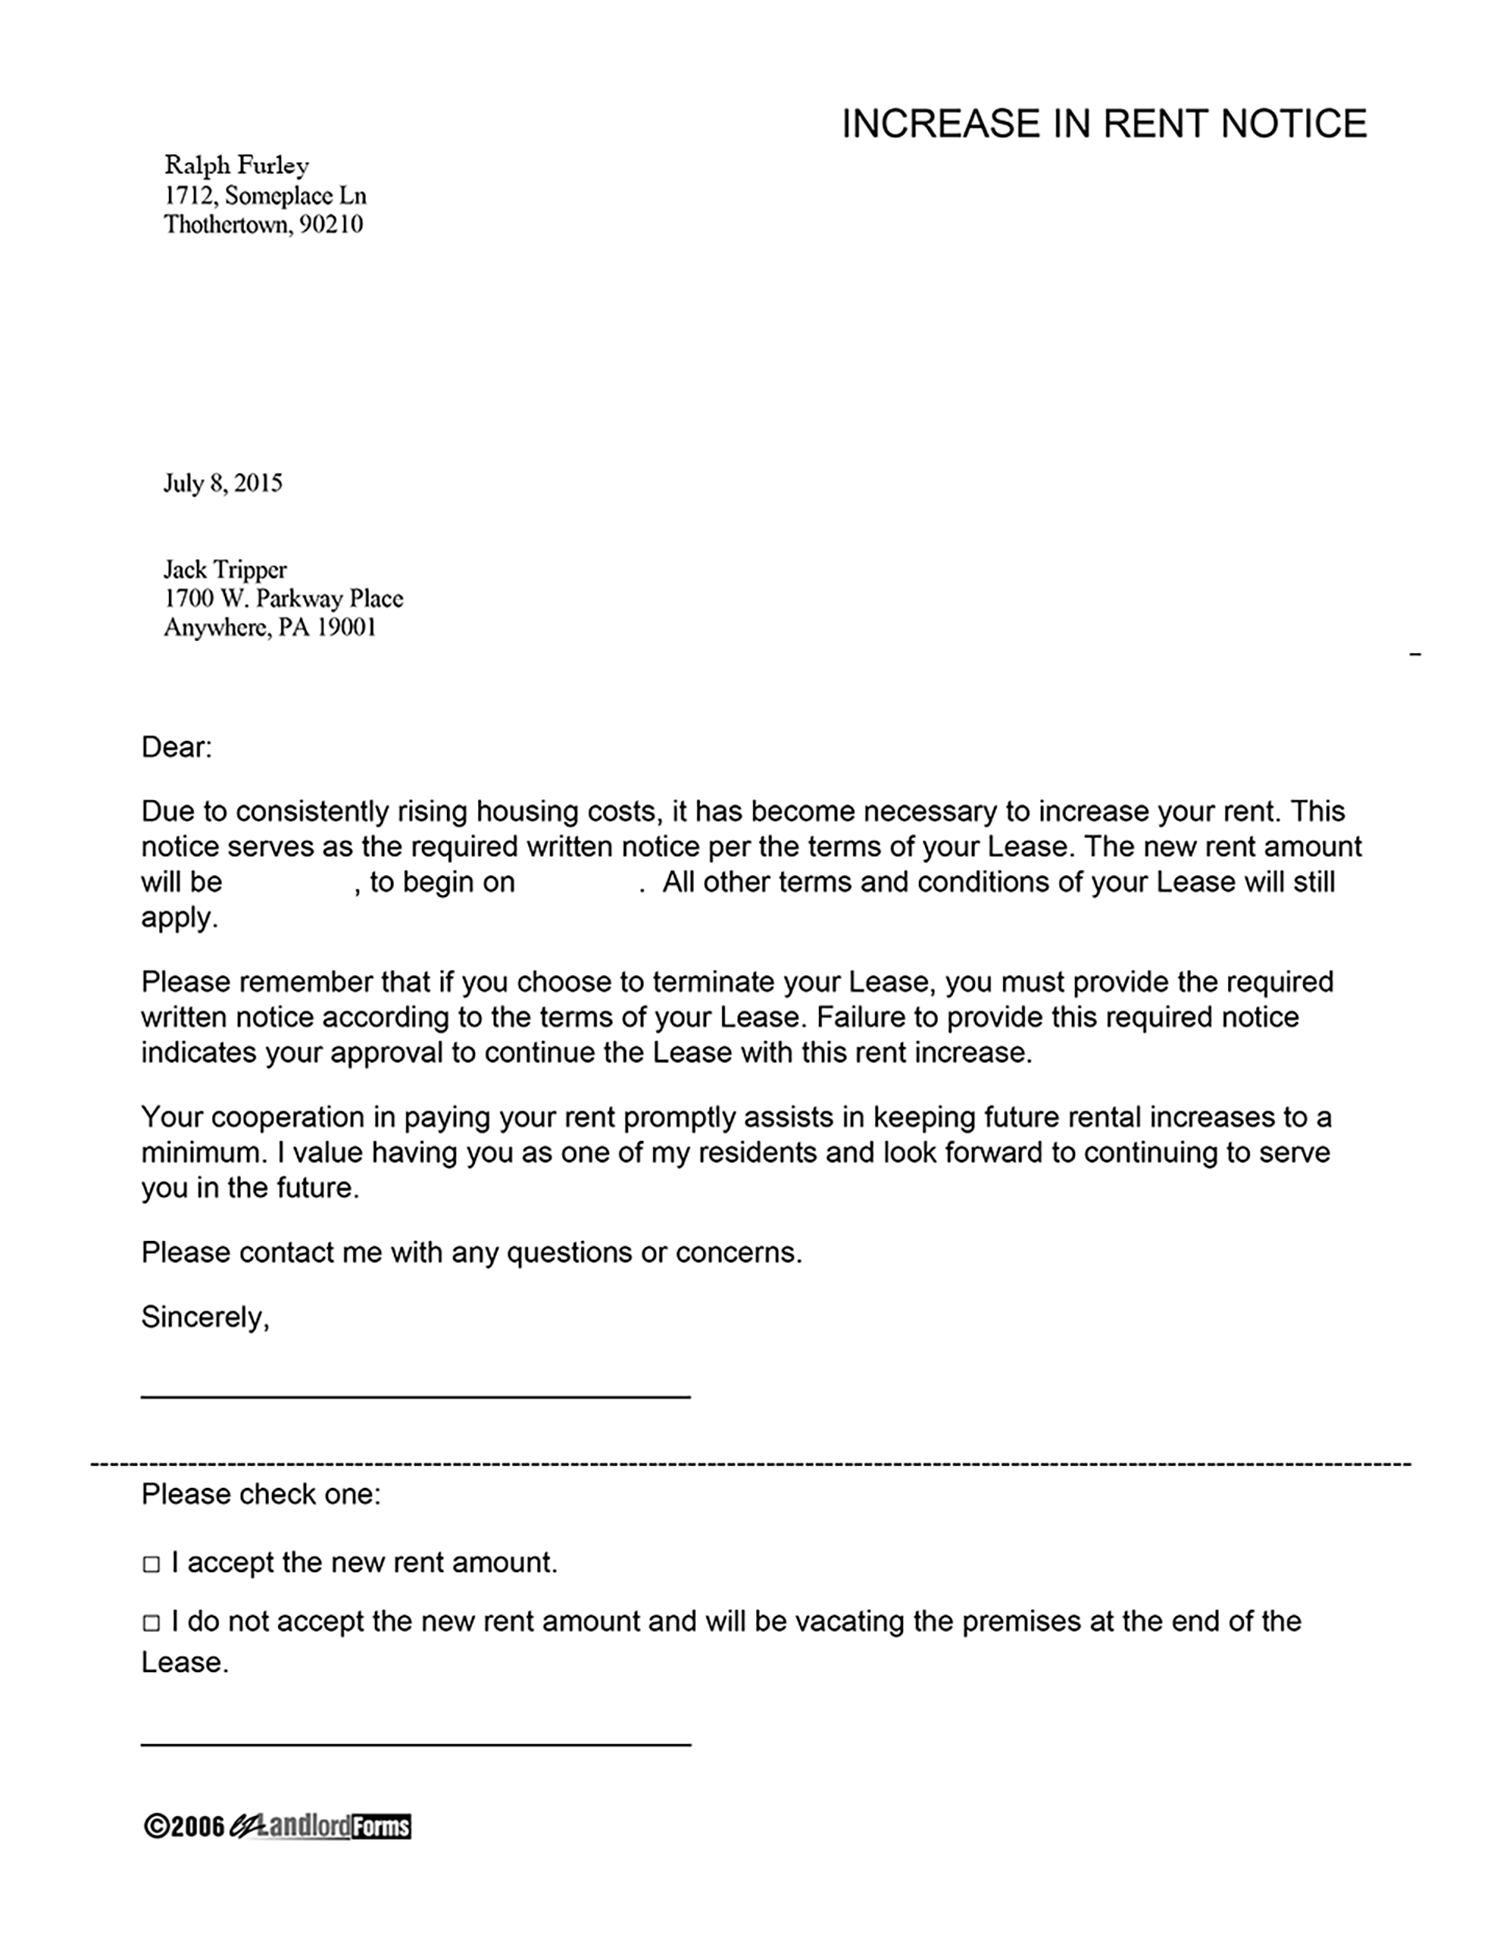 Nice Rent Increase Letter from www.ezlandlordforms.com